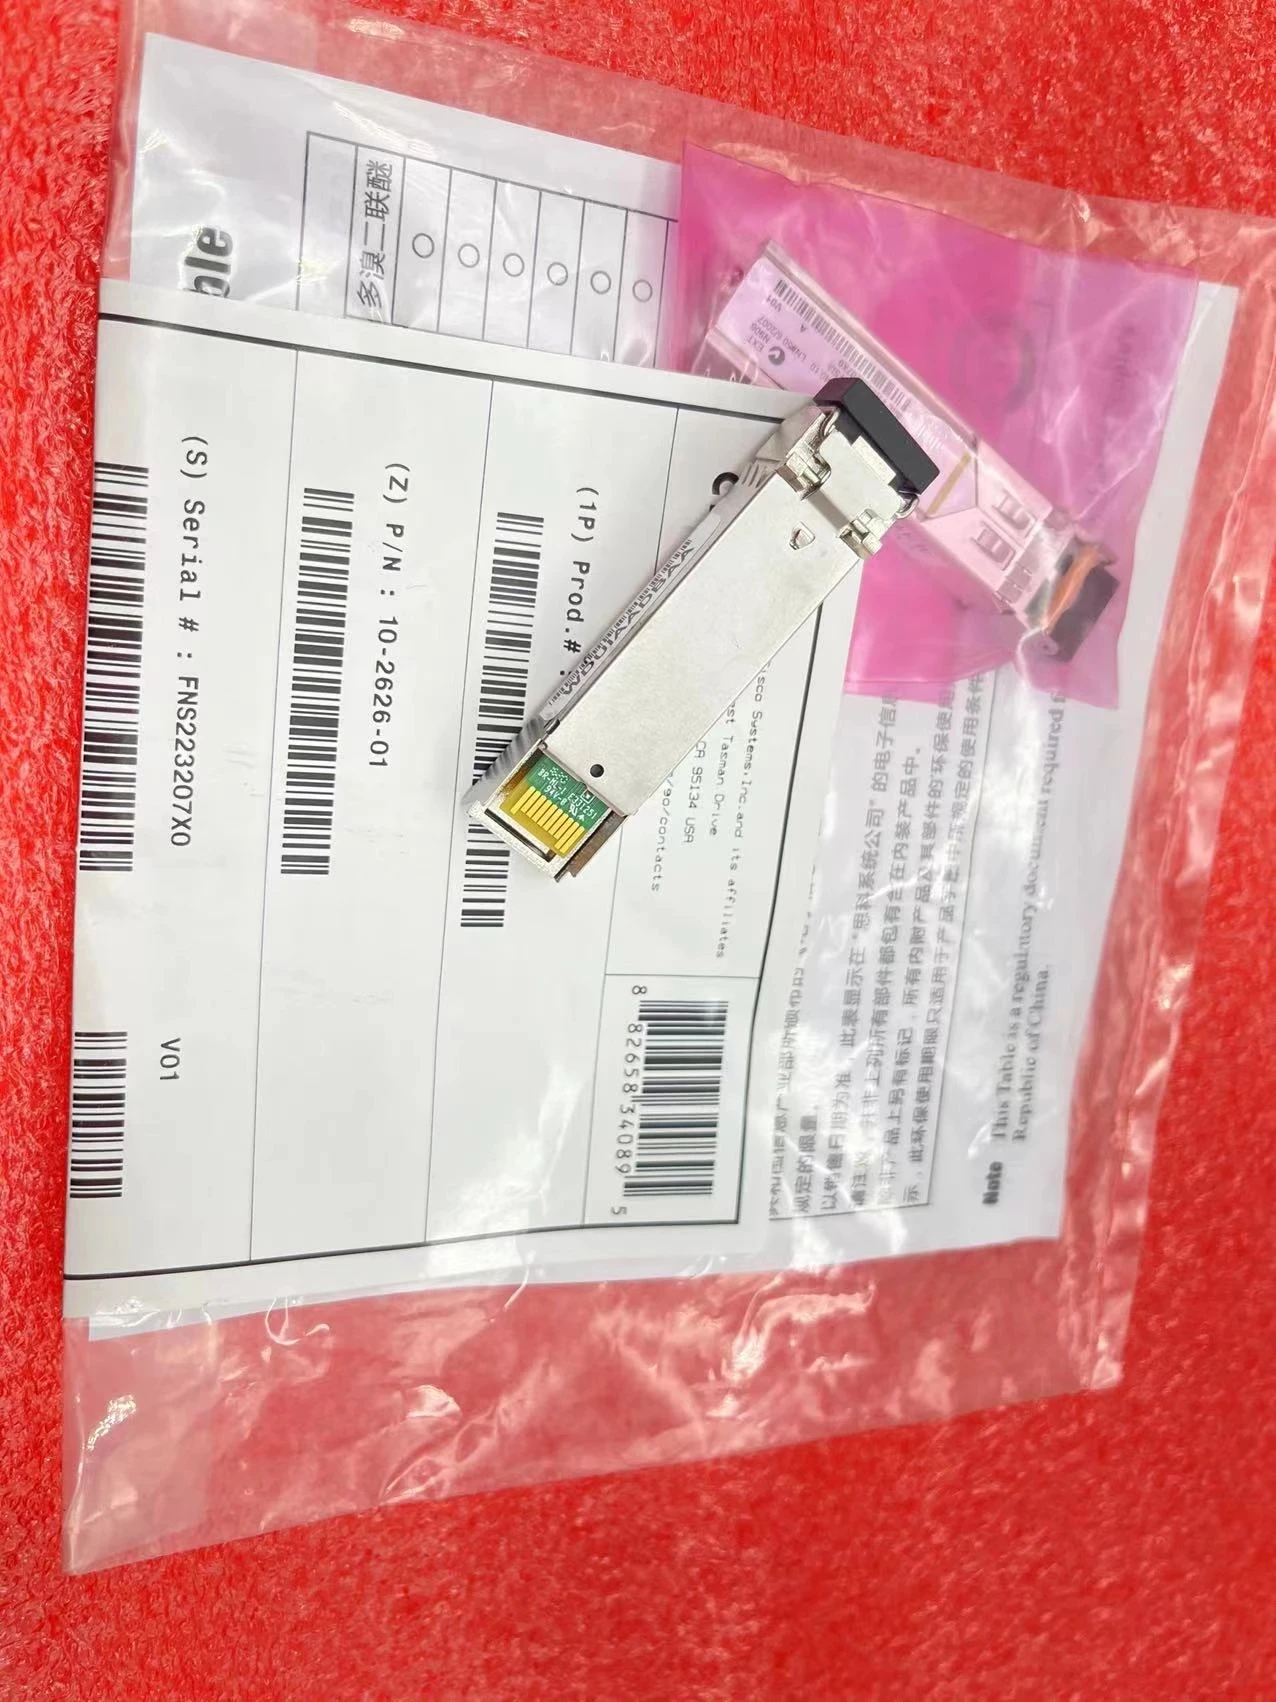 100%New In box  1 year warranty  GLC-T  RJ45 SFP 1.25G 100M   Need more angles photos, please contact me